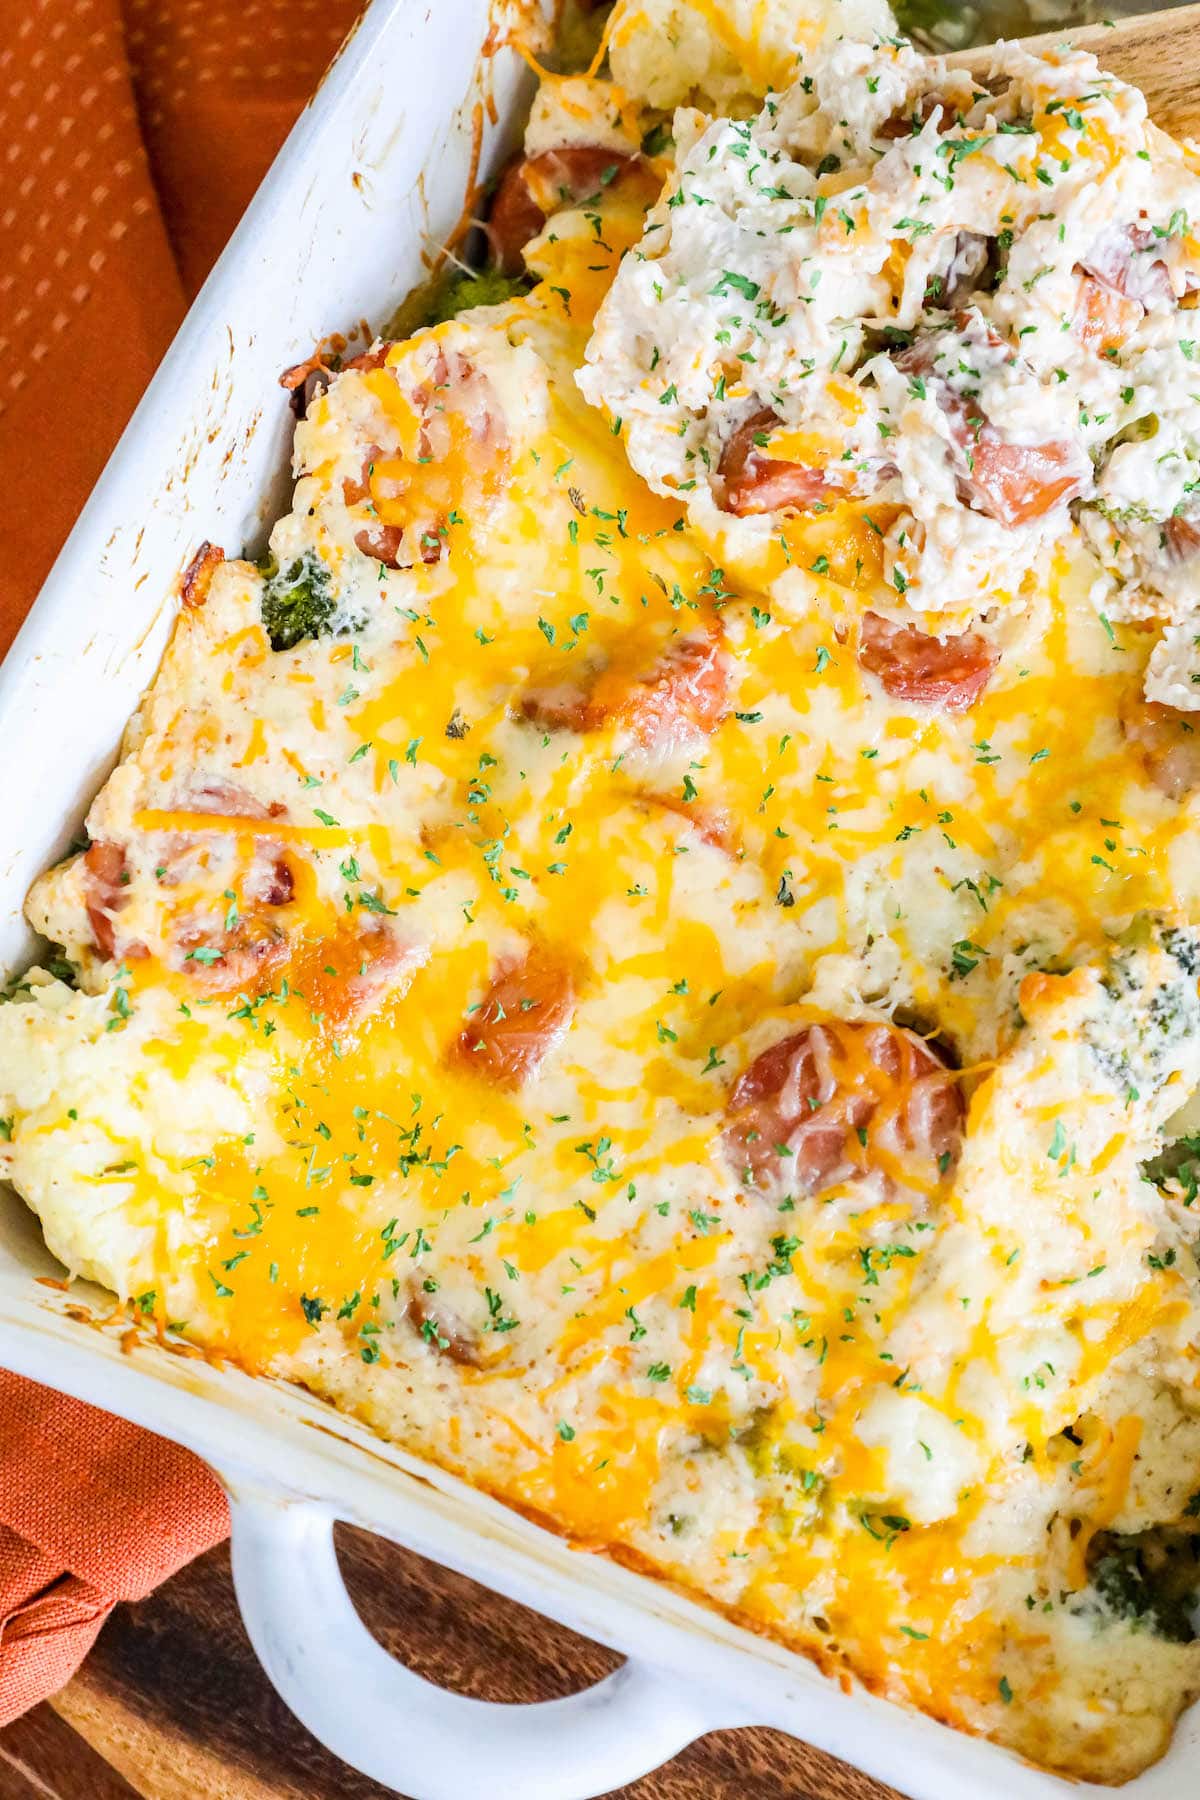 casserole with sliced sausage, broccoli, cauliflower, and herb seasonings topped with melted cheese in a white casserole dish on a table